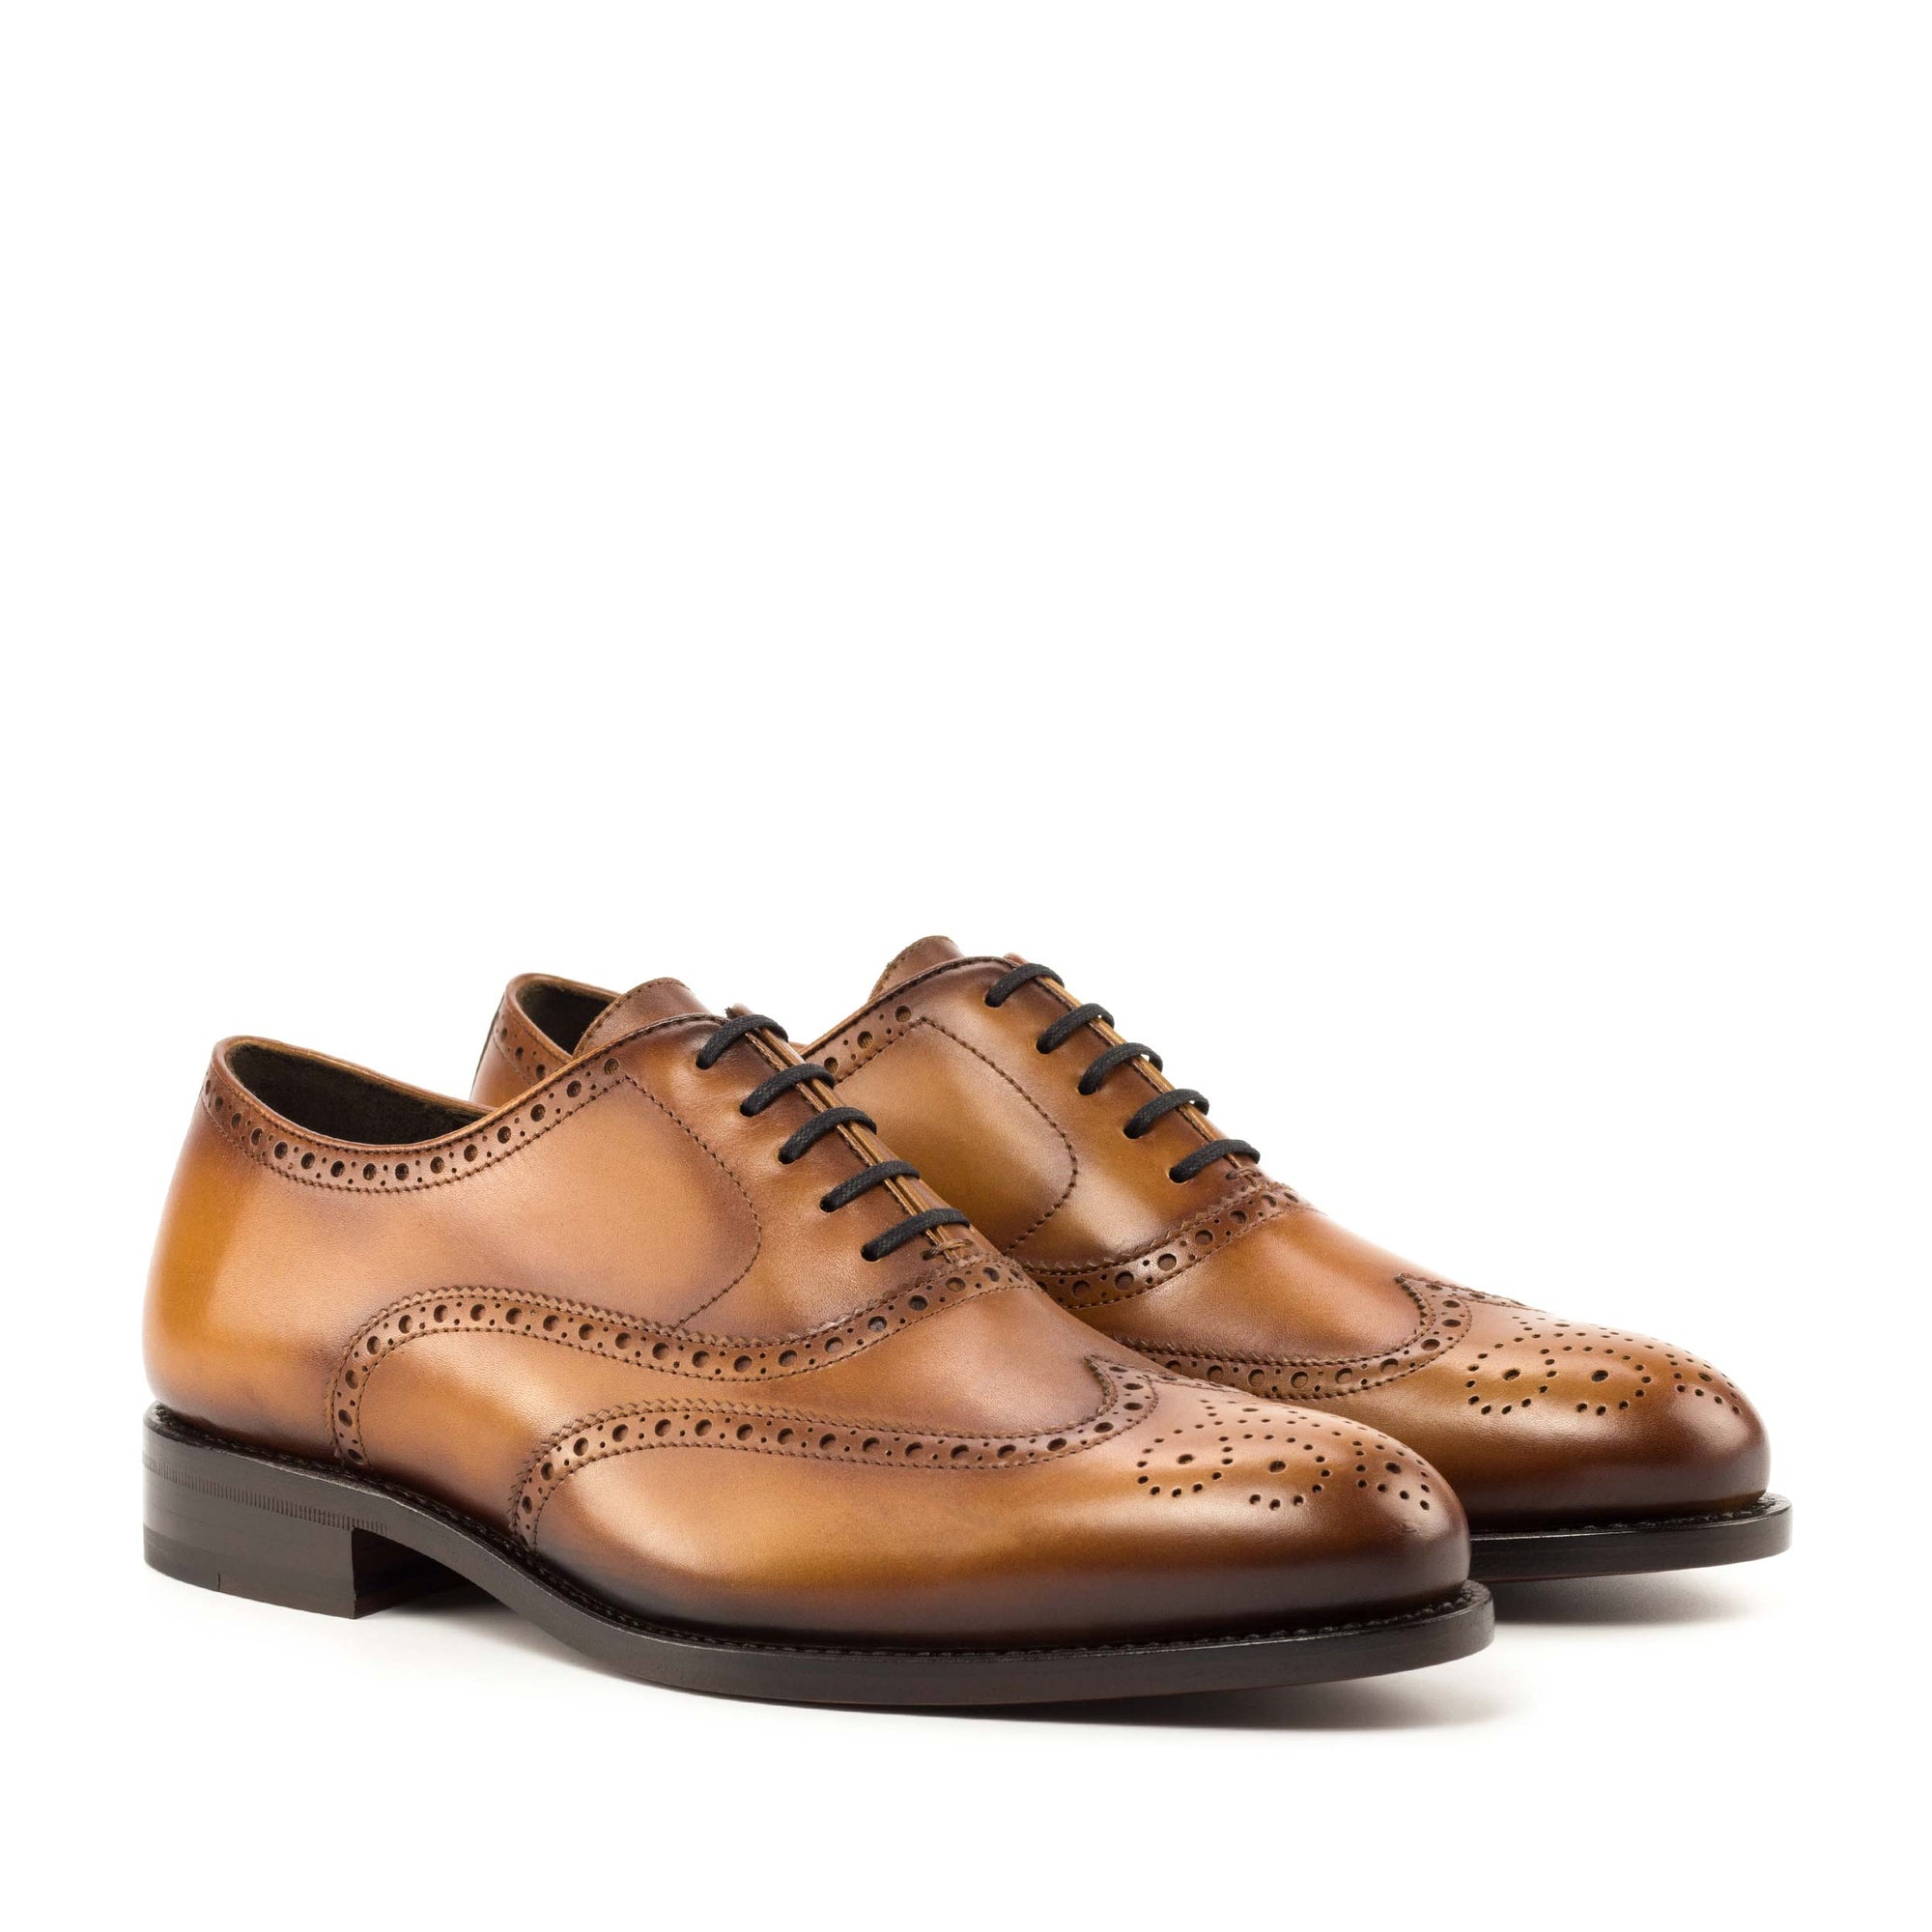 Full Brogue Shoes in Toffee Coloured Leather